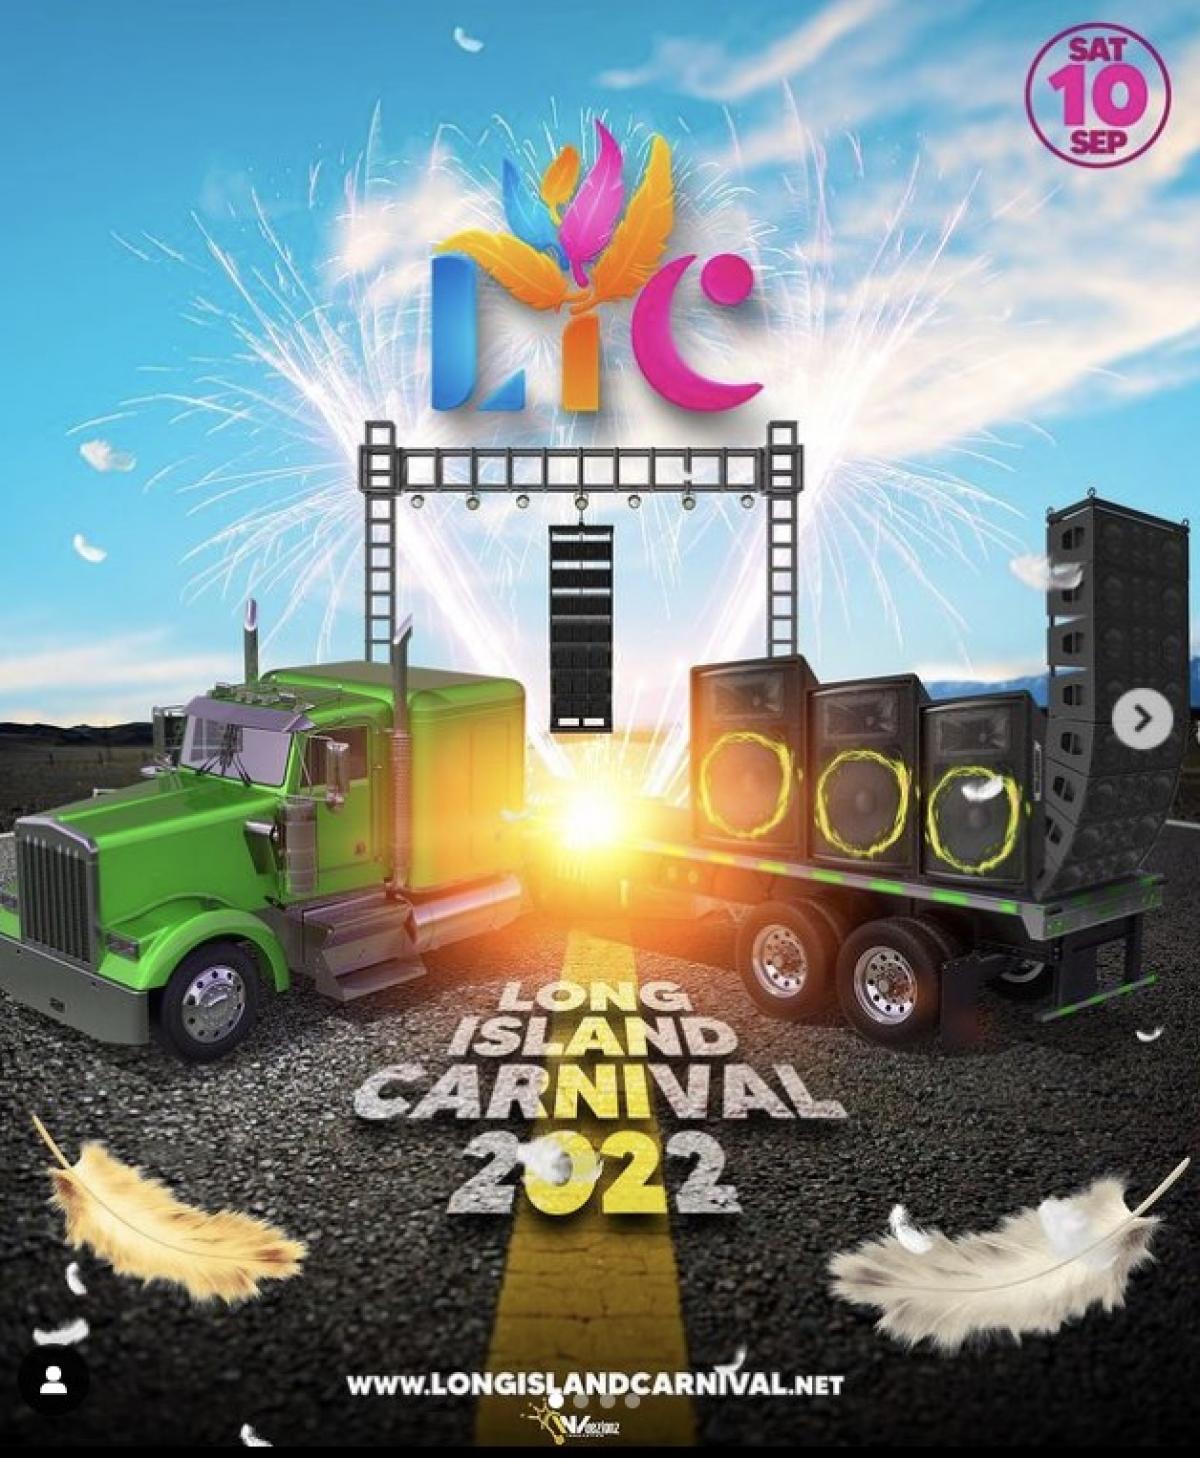 Long Island Carnival flyer or graphic.